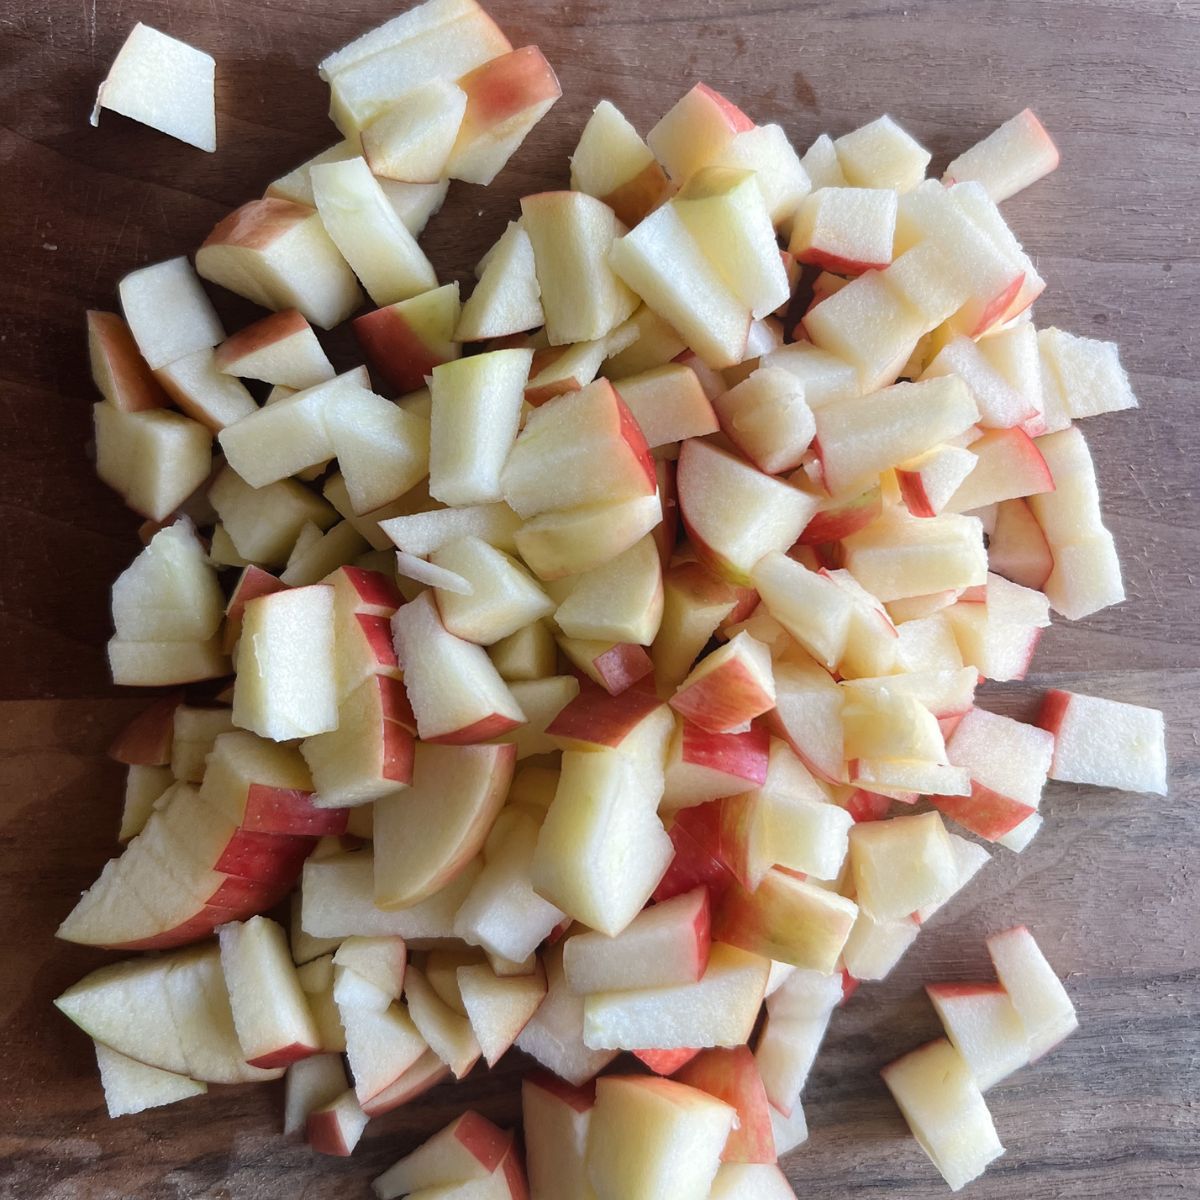 Three chopped apples on a wooden cutting board.